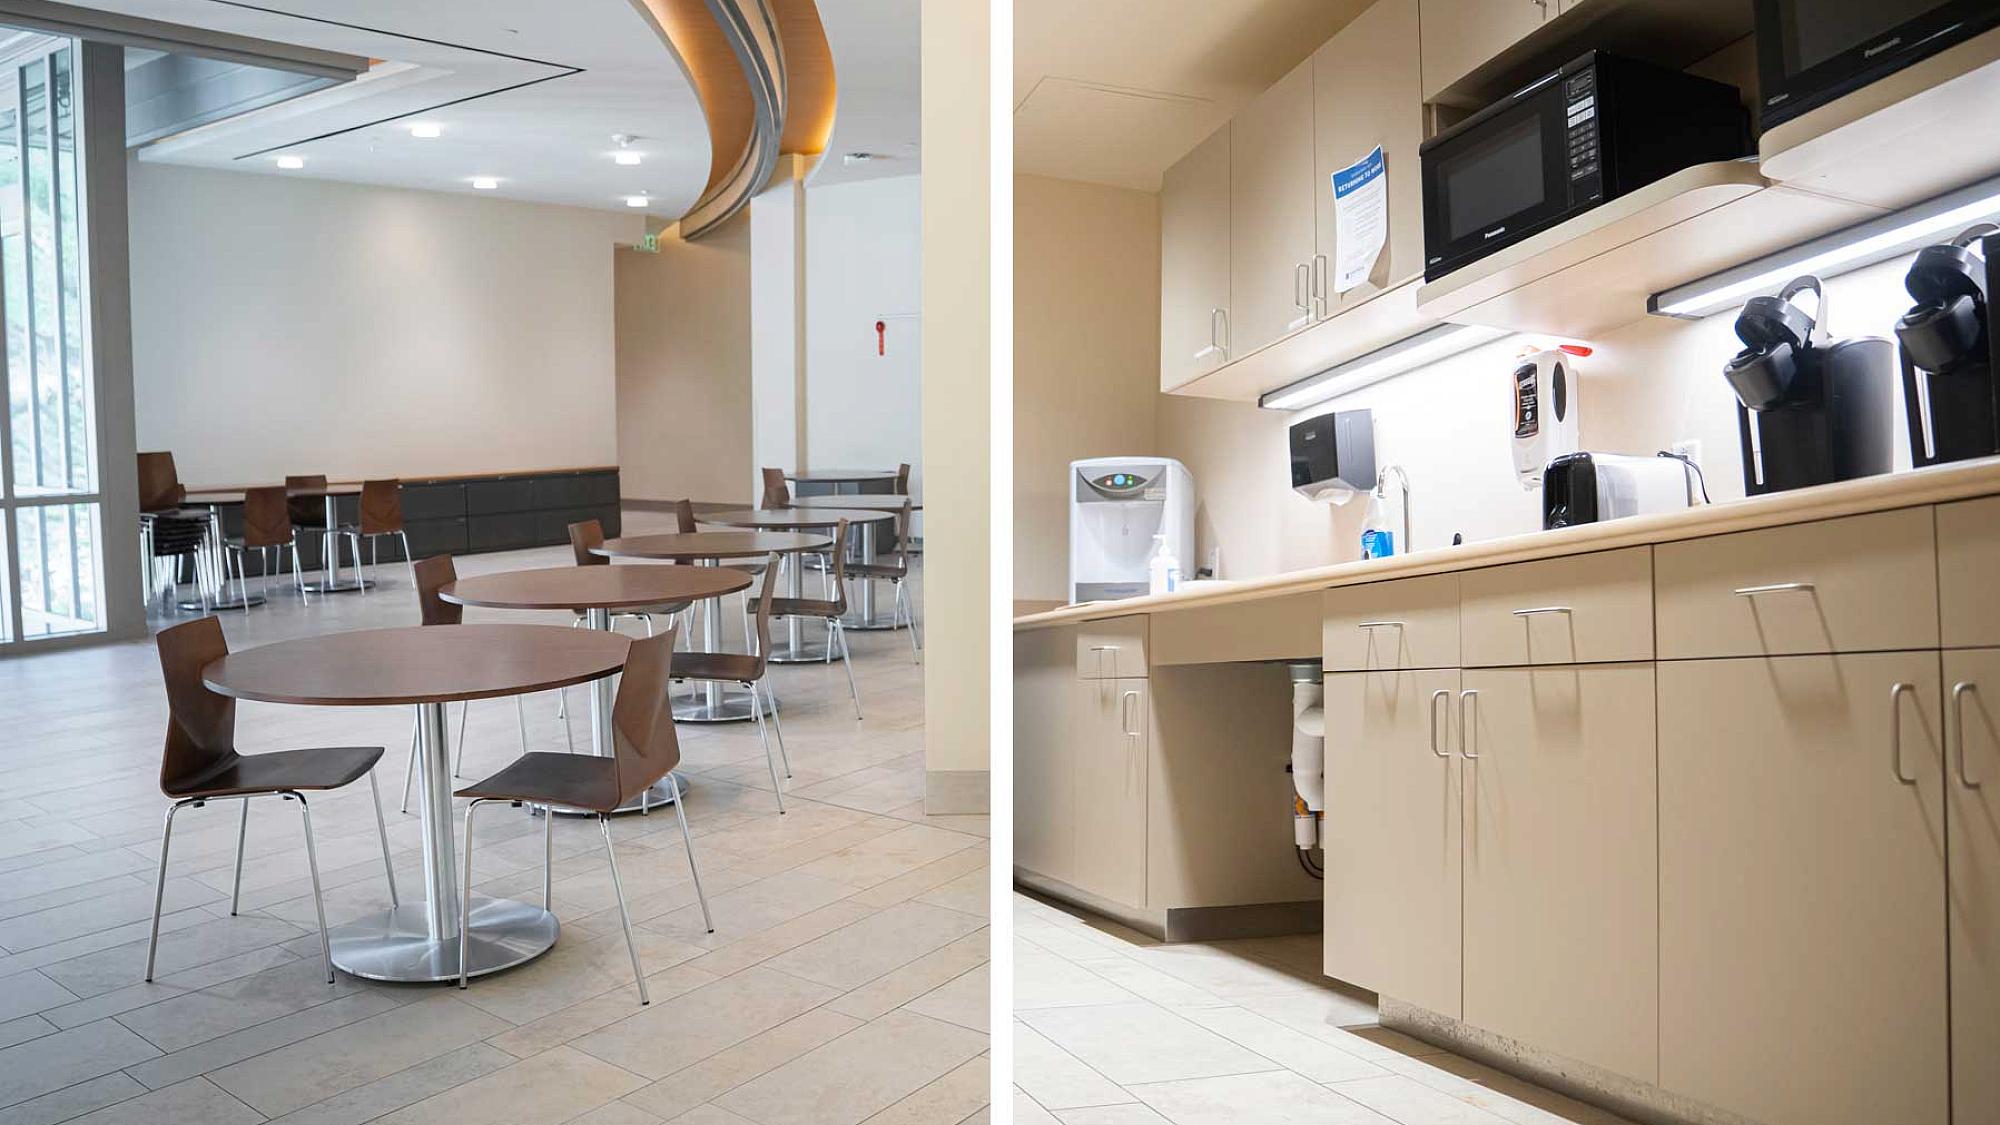 Break room with microwaves, fridge, and seating